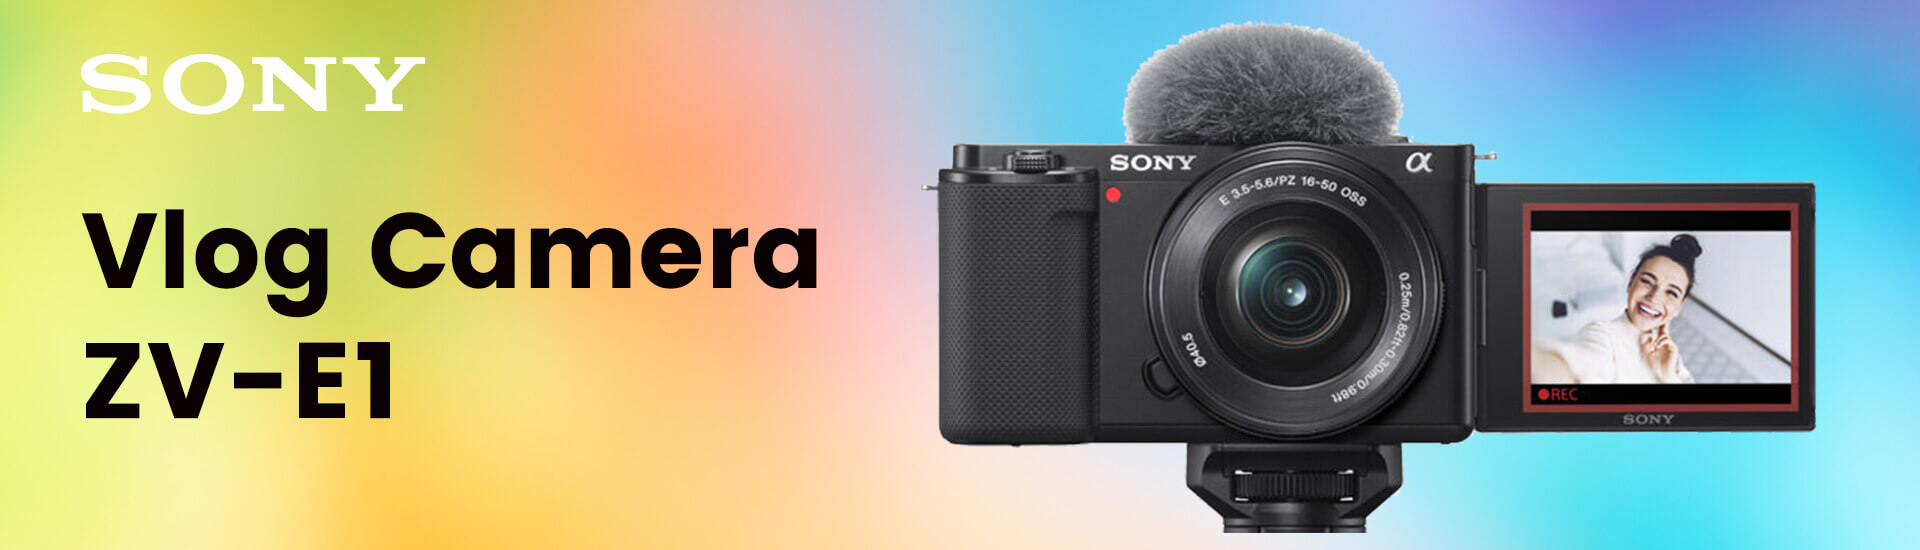 Introducing the Sony ZV-E1 vlog camera